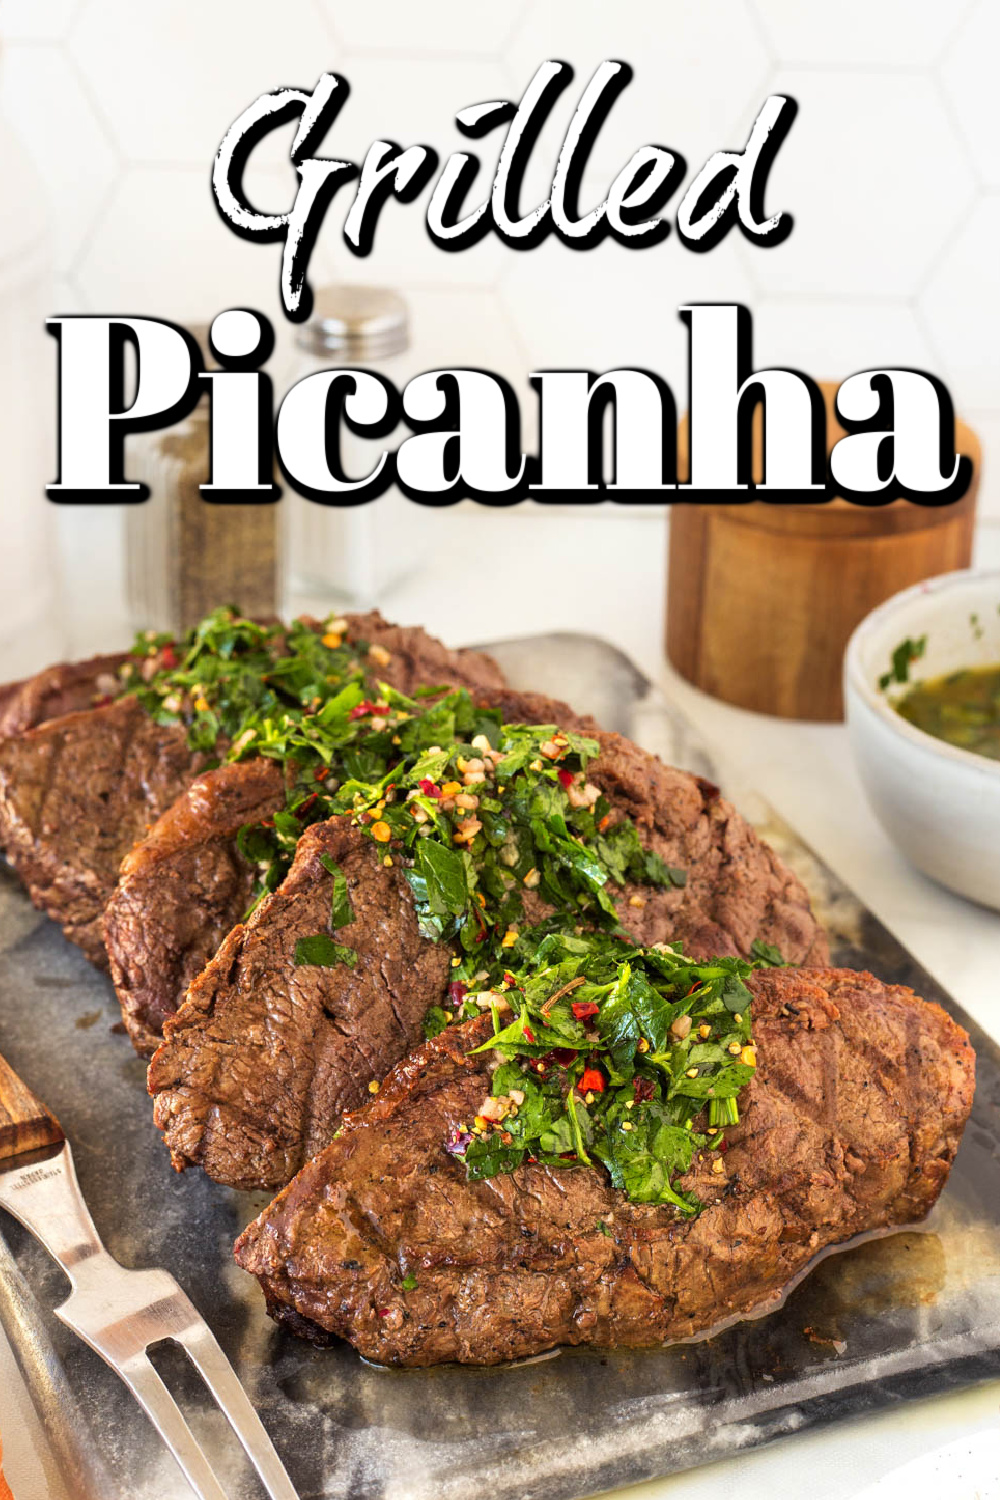 This grilled picanha is a cut of beef that is very popular in Brazil; with the homemade chimichurri sauce, you are going to love it too!